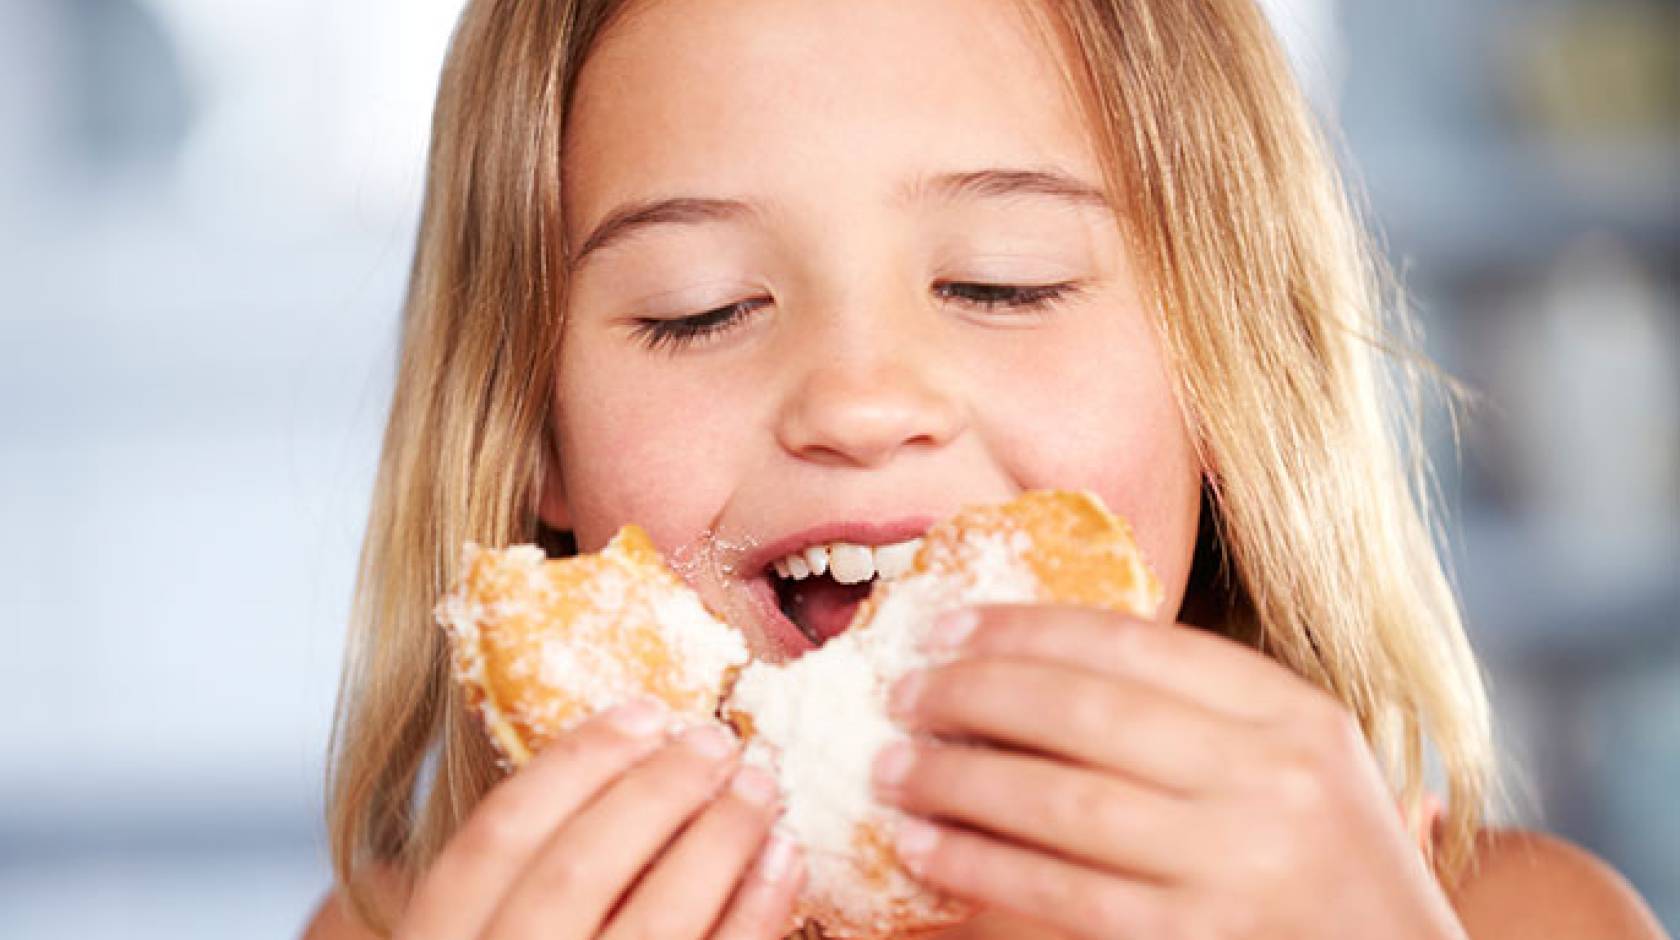 girl with sugared donut